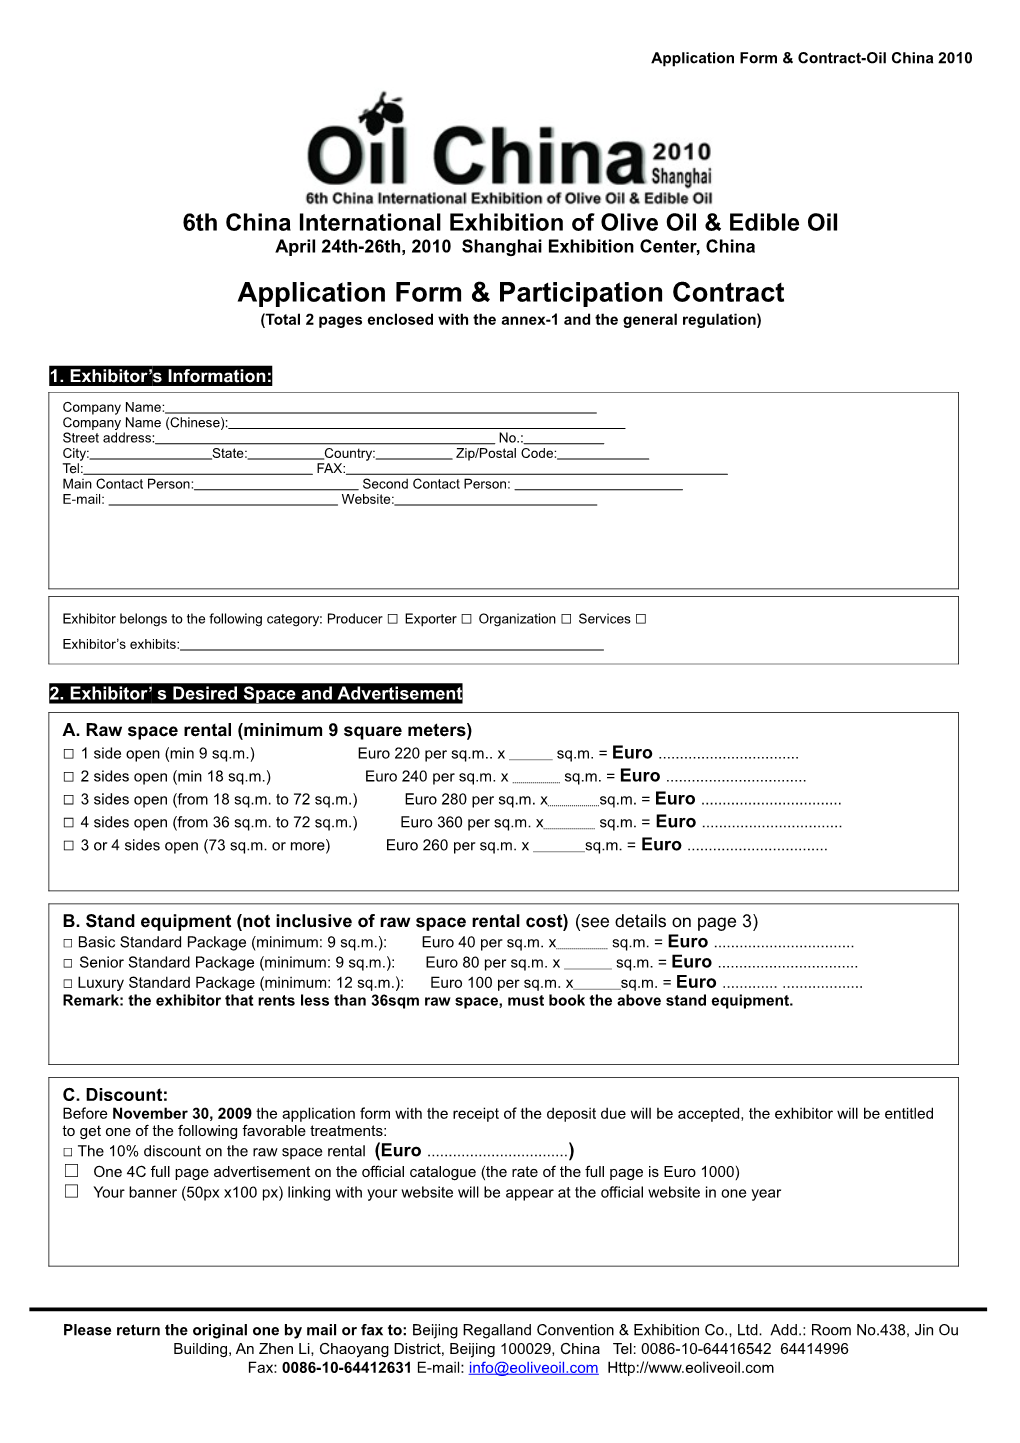 Application Form & Contract-Oil China 2010